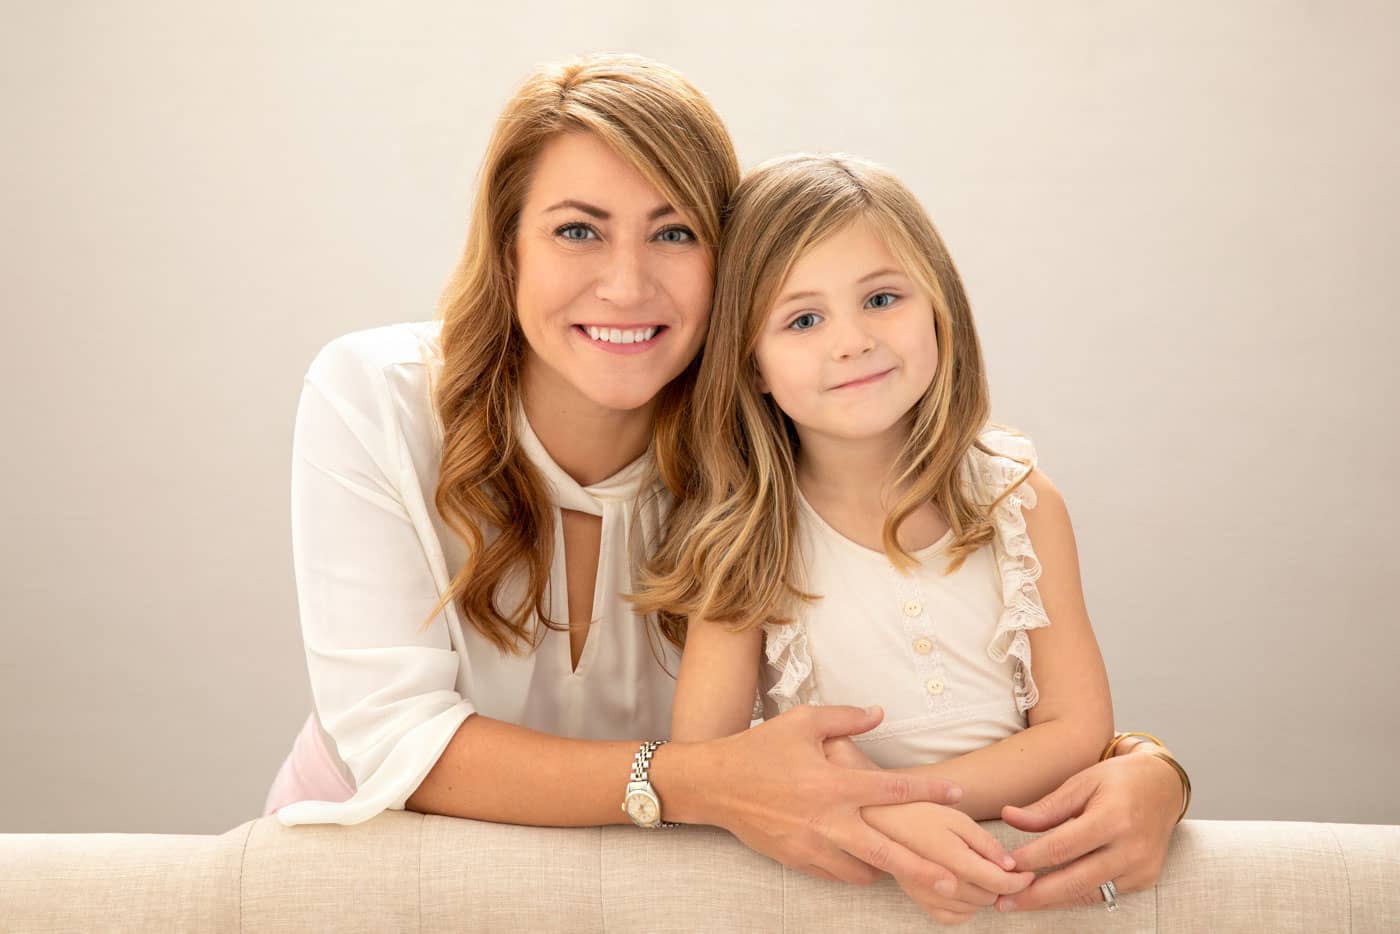 Precious photo of a beautiful mother and daughter standing close and leaning on a couch. The mother, who has long dirty blonde hair, has her arms around her daughter. They both are wearing white shirts. Chris and Amber Edwards Family Portrait Photography.